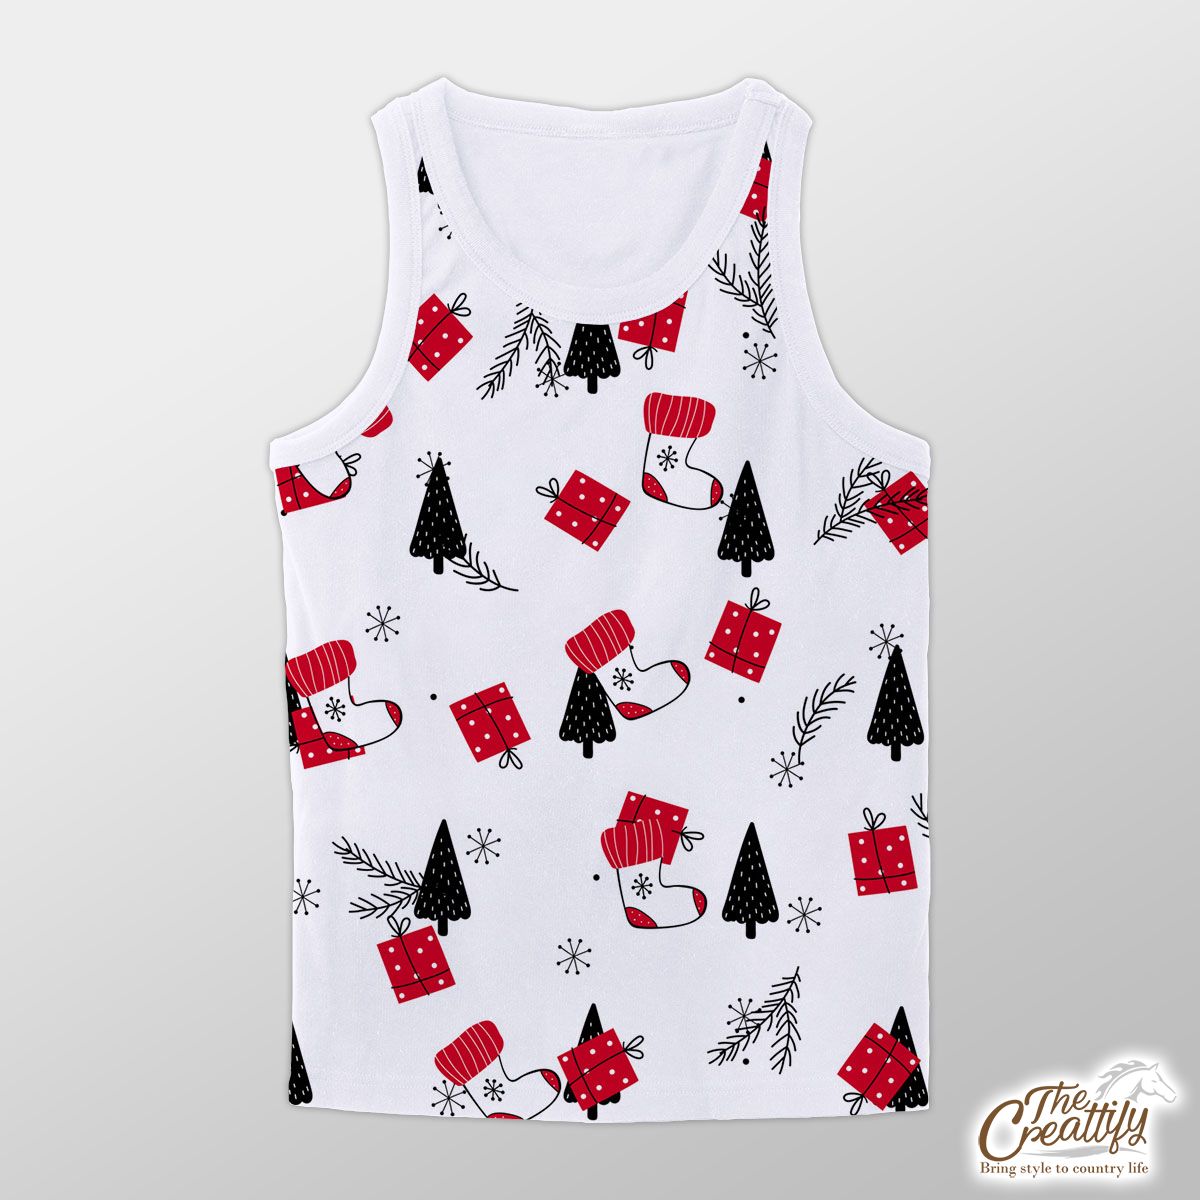 Hand Drawn Red Socks, Christmas Gifts, Pine Tree Silhouette And Snowflake Clipart Seamless White Pattern Unisex Tank Top